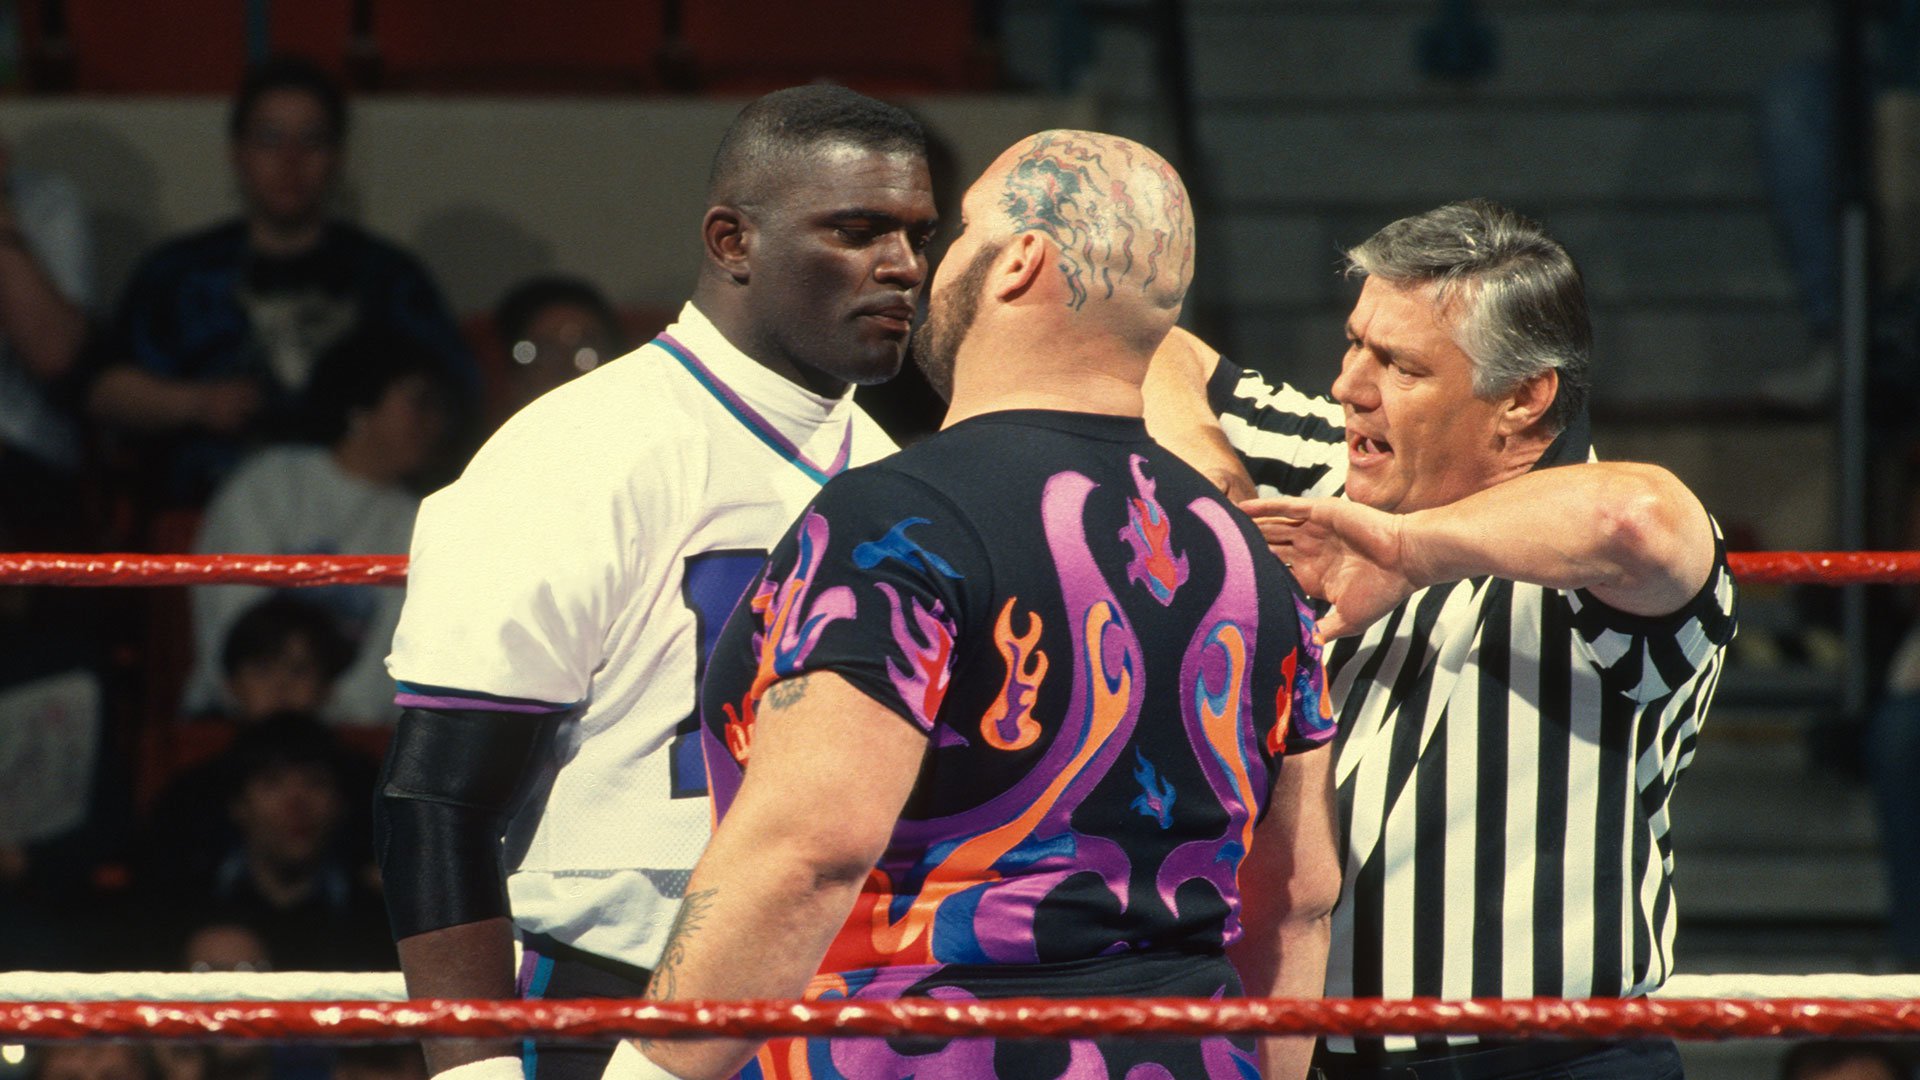 Lawrence Taylor in WWE Wrestlemania